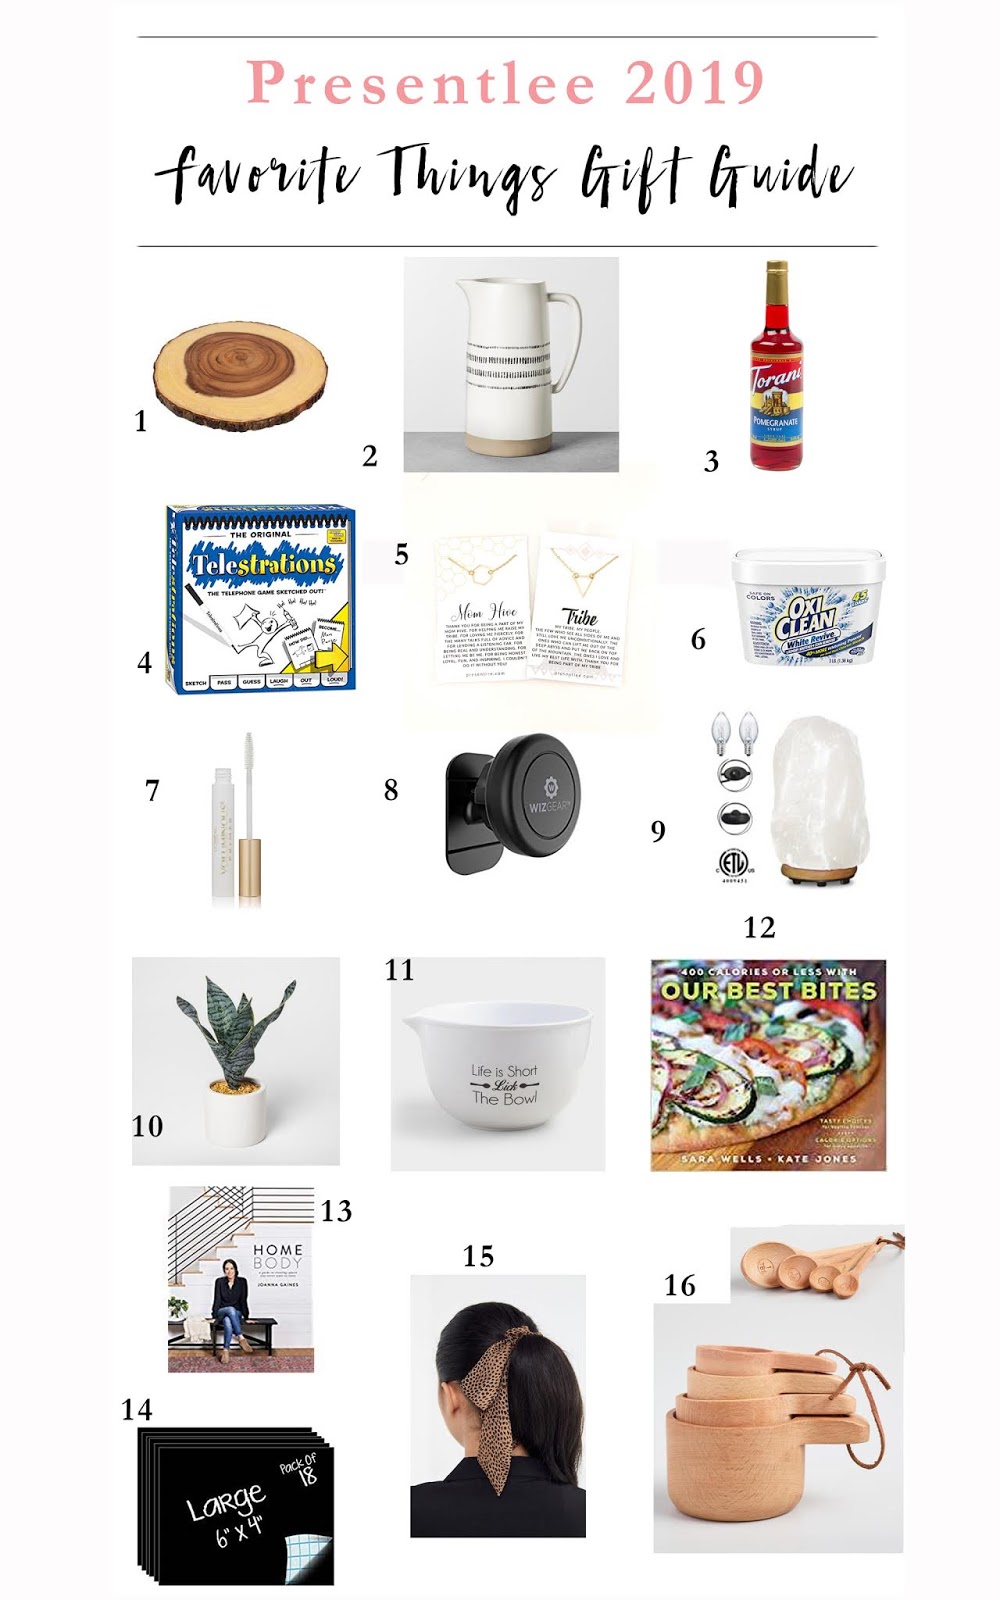 2019 Favorite Things Gift Guide | The Sullengers